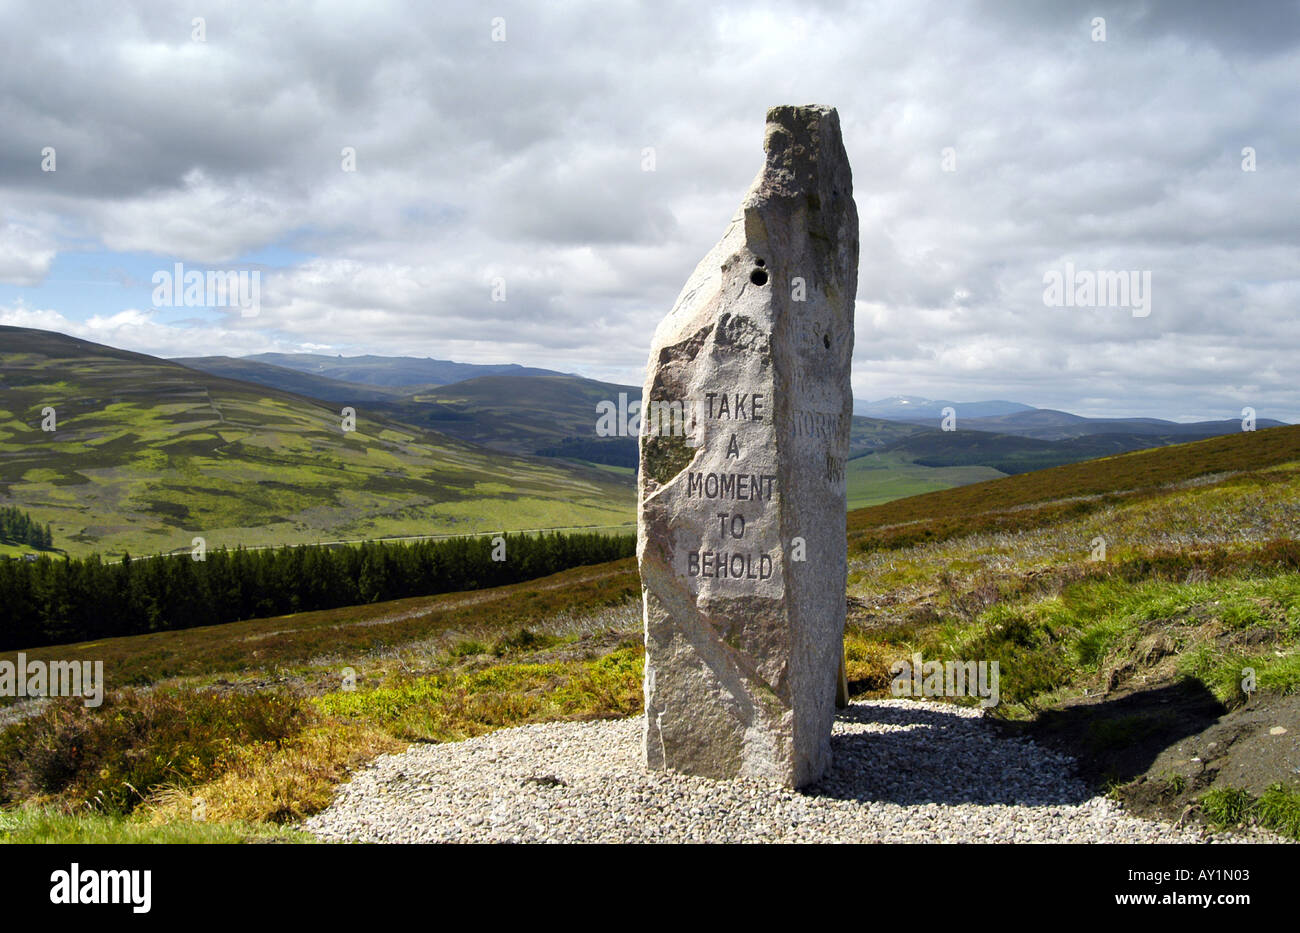 Heather in flower & landmarks of Scotland;  Standing Stone Monolith engraved on Scottish heather moors 'Take a moment to behold' Lecht road Scotland. Stock Photo